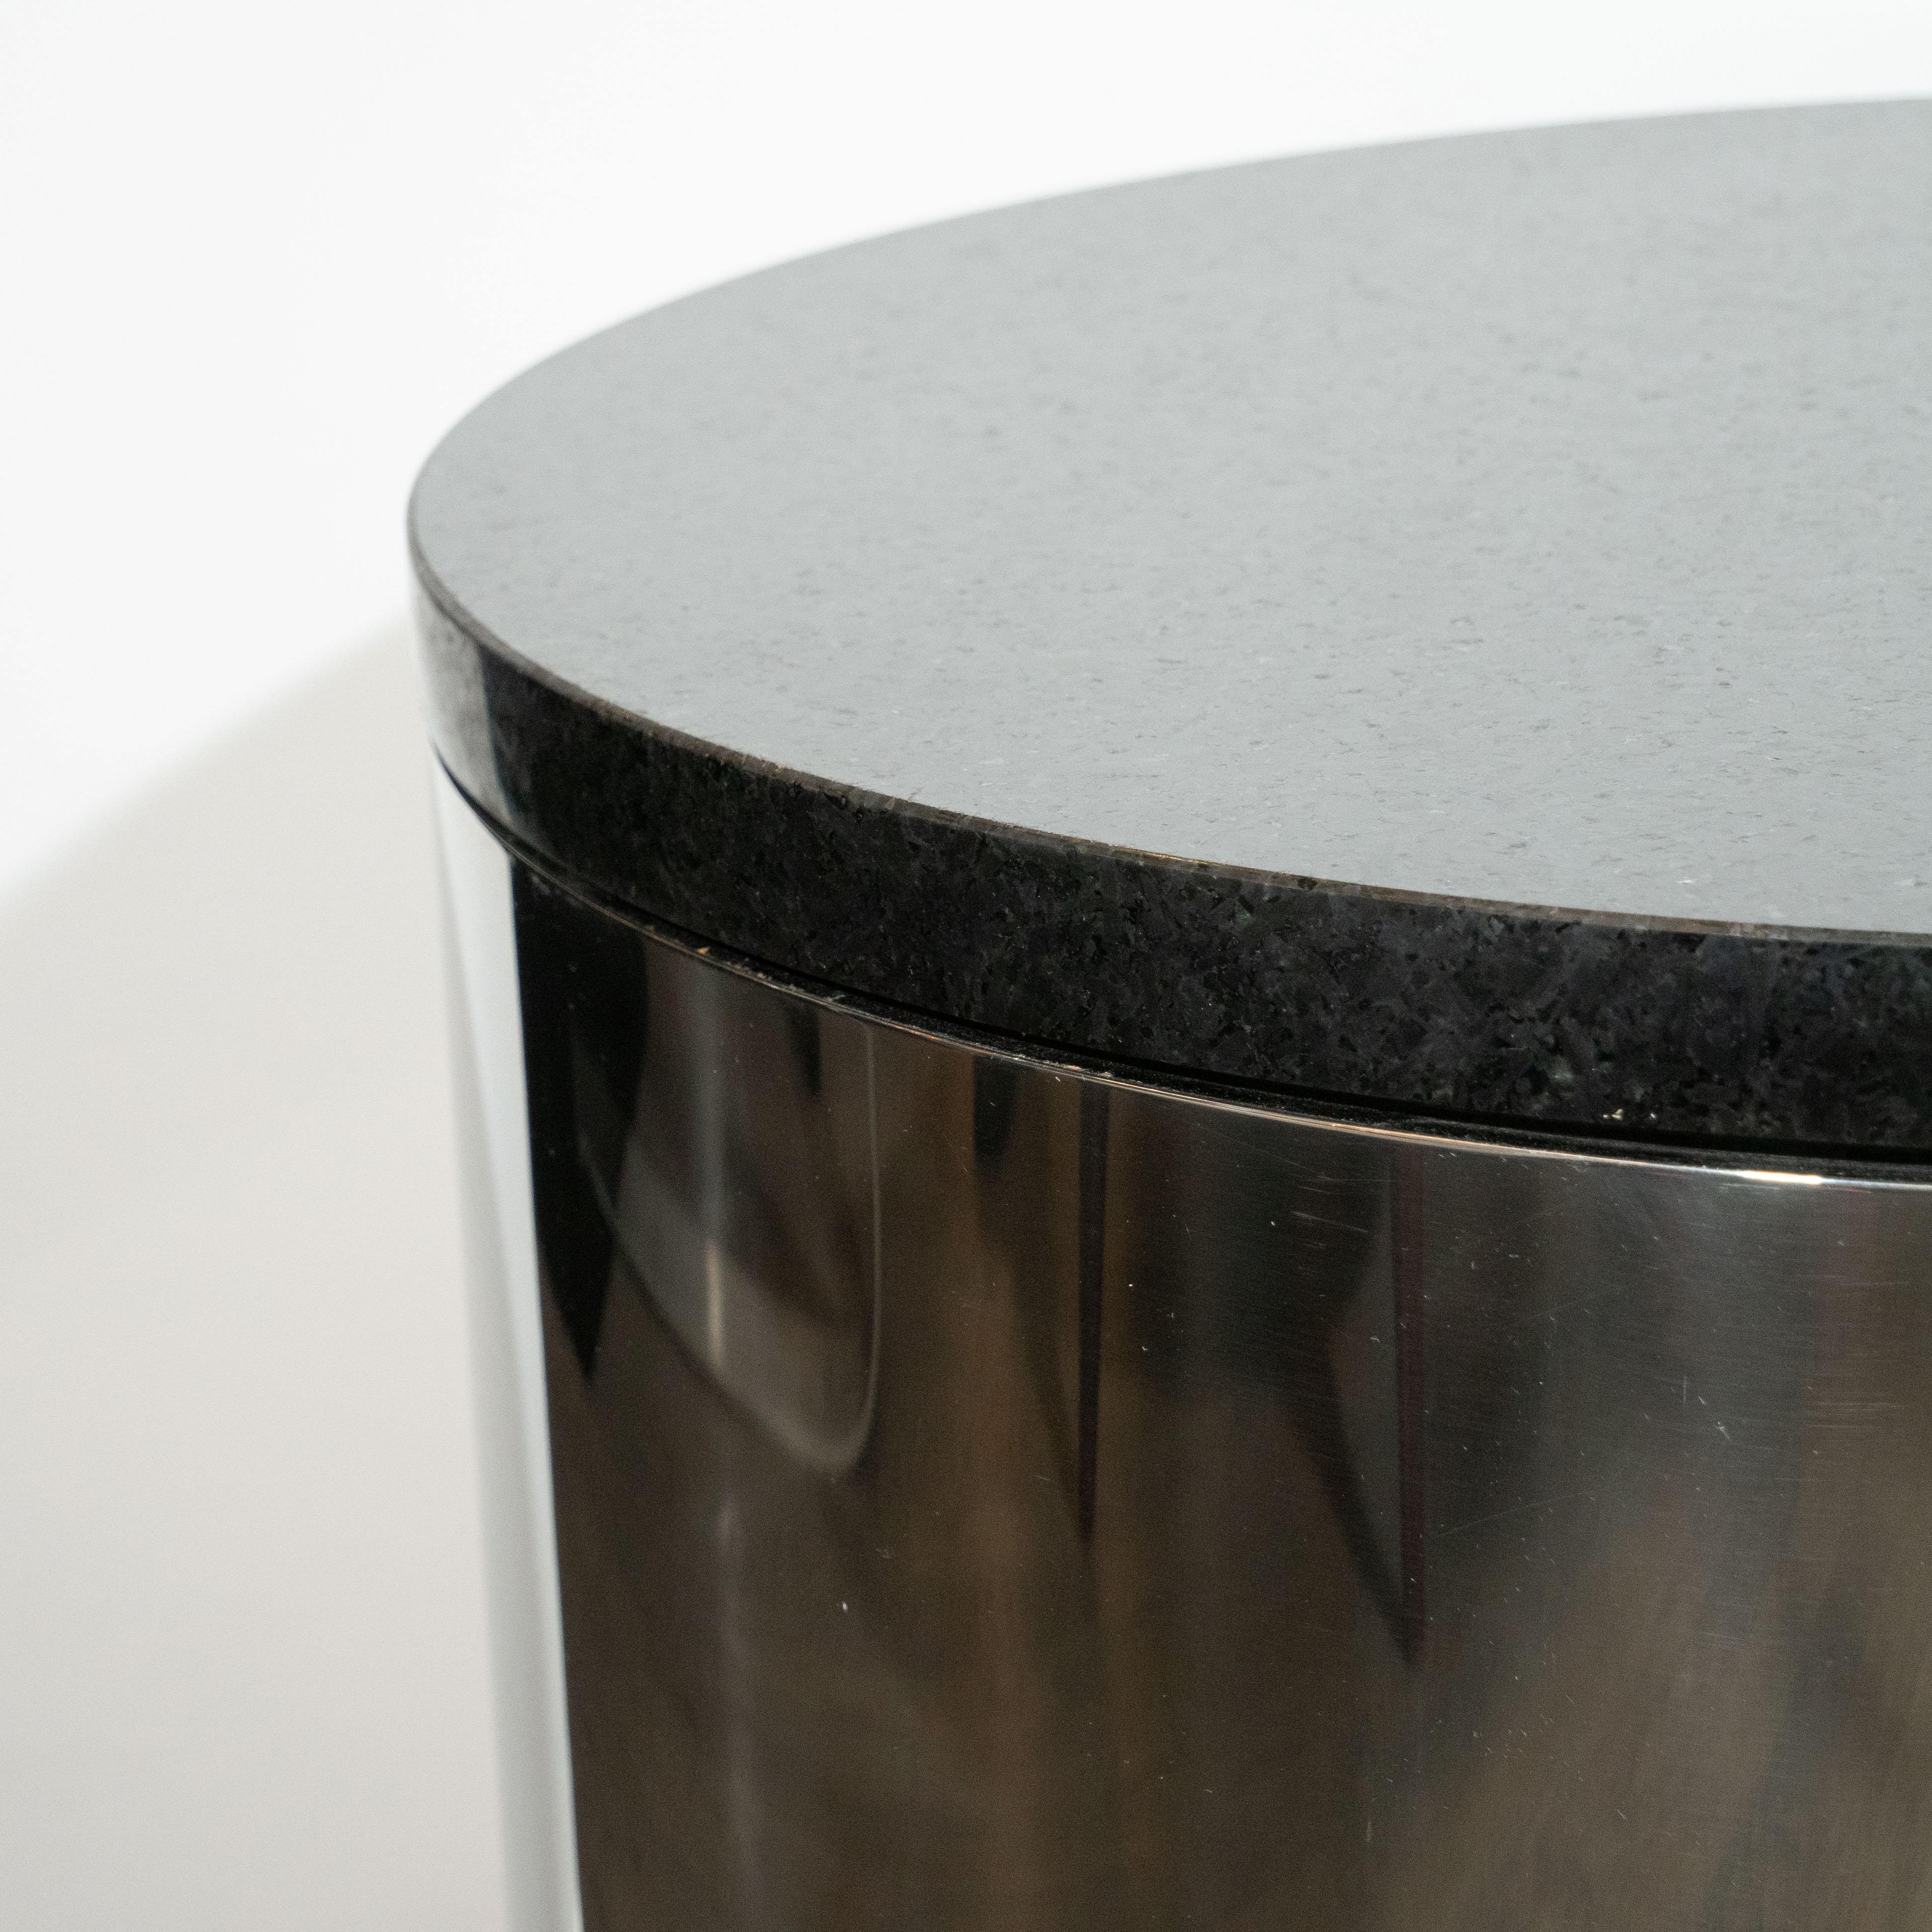 Late 20th Century Mid-Century Modern Cylindrical Drum Form Chrome and Granite Occasional Table